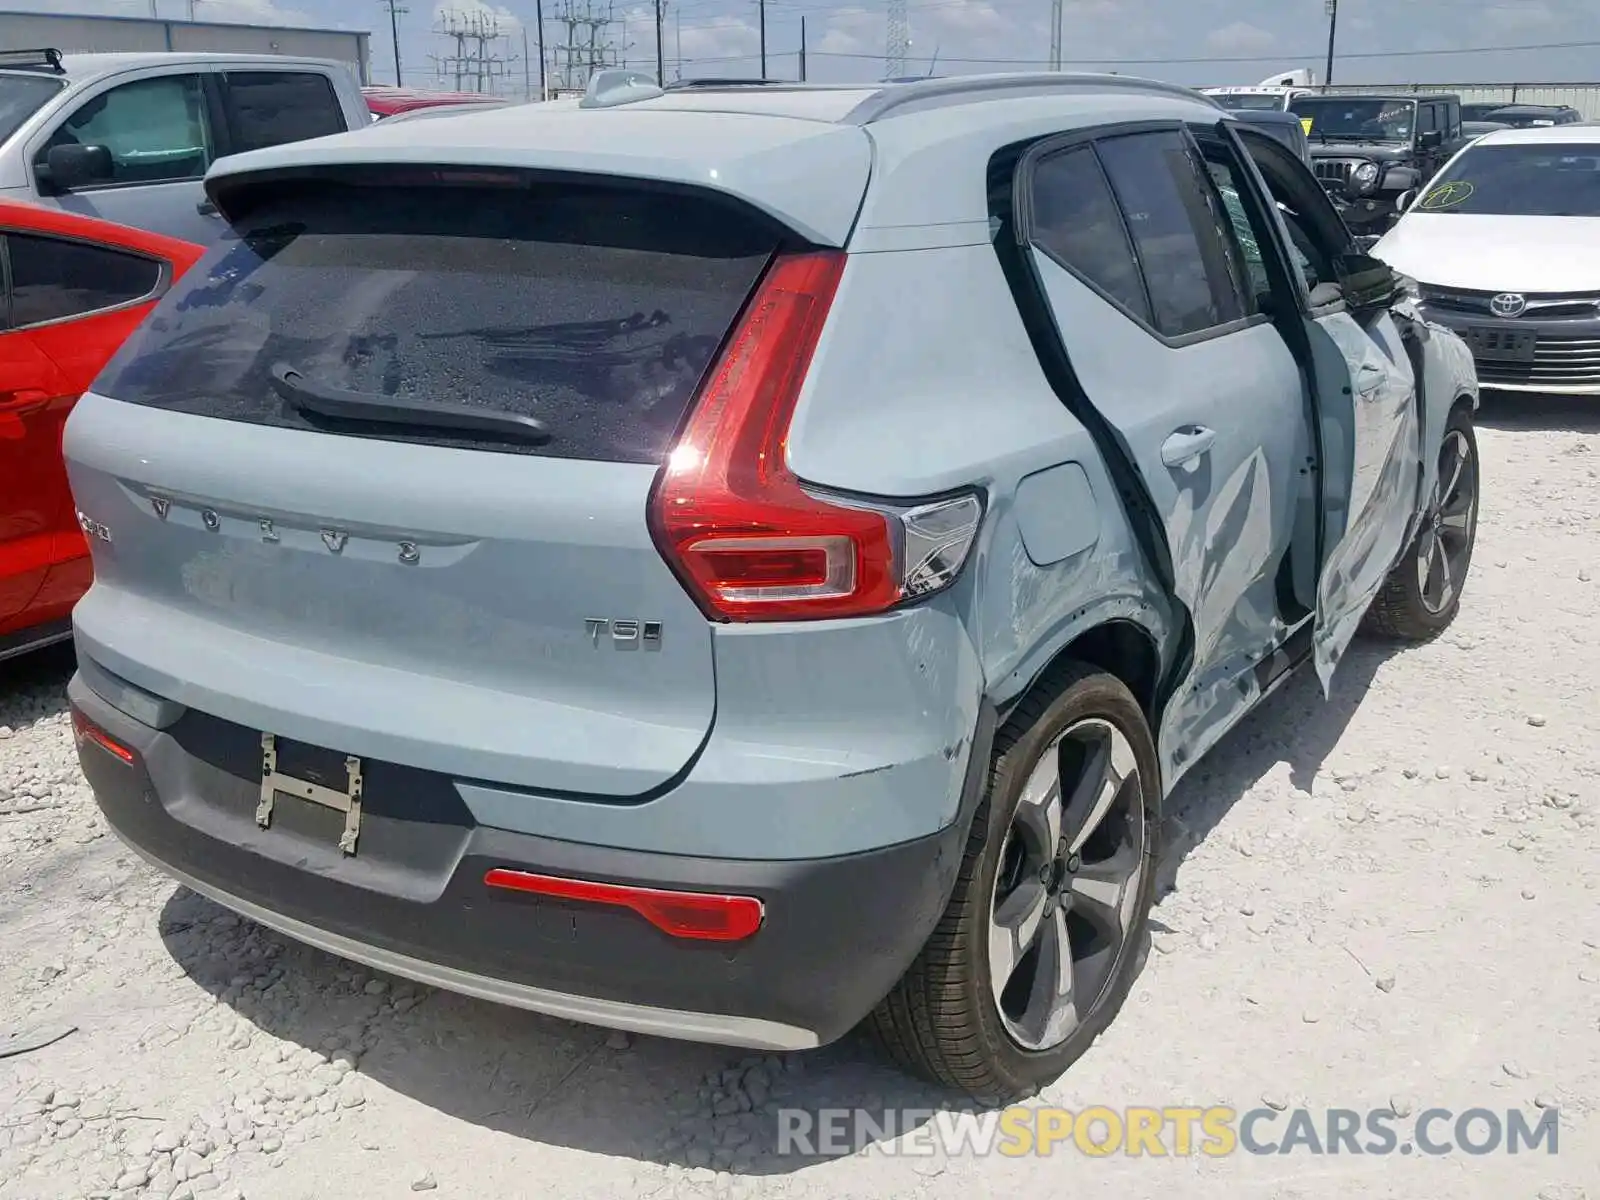 4 Photograph of a damaged car YV4162UK8K2090156 VOLVO XC40 T5 2019